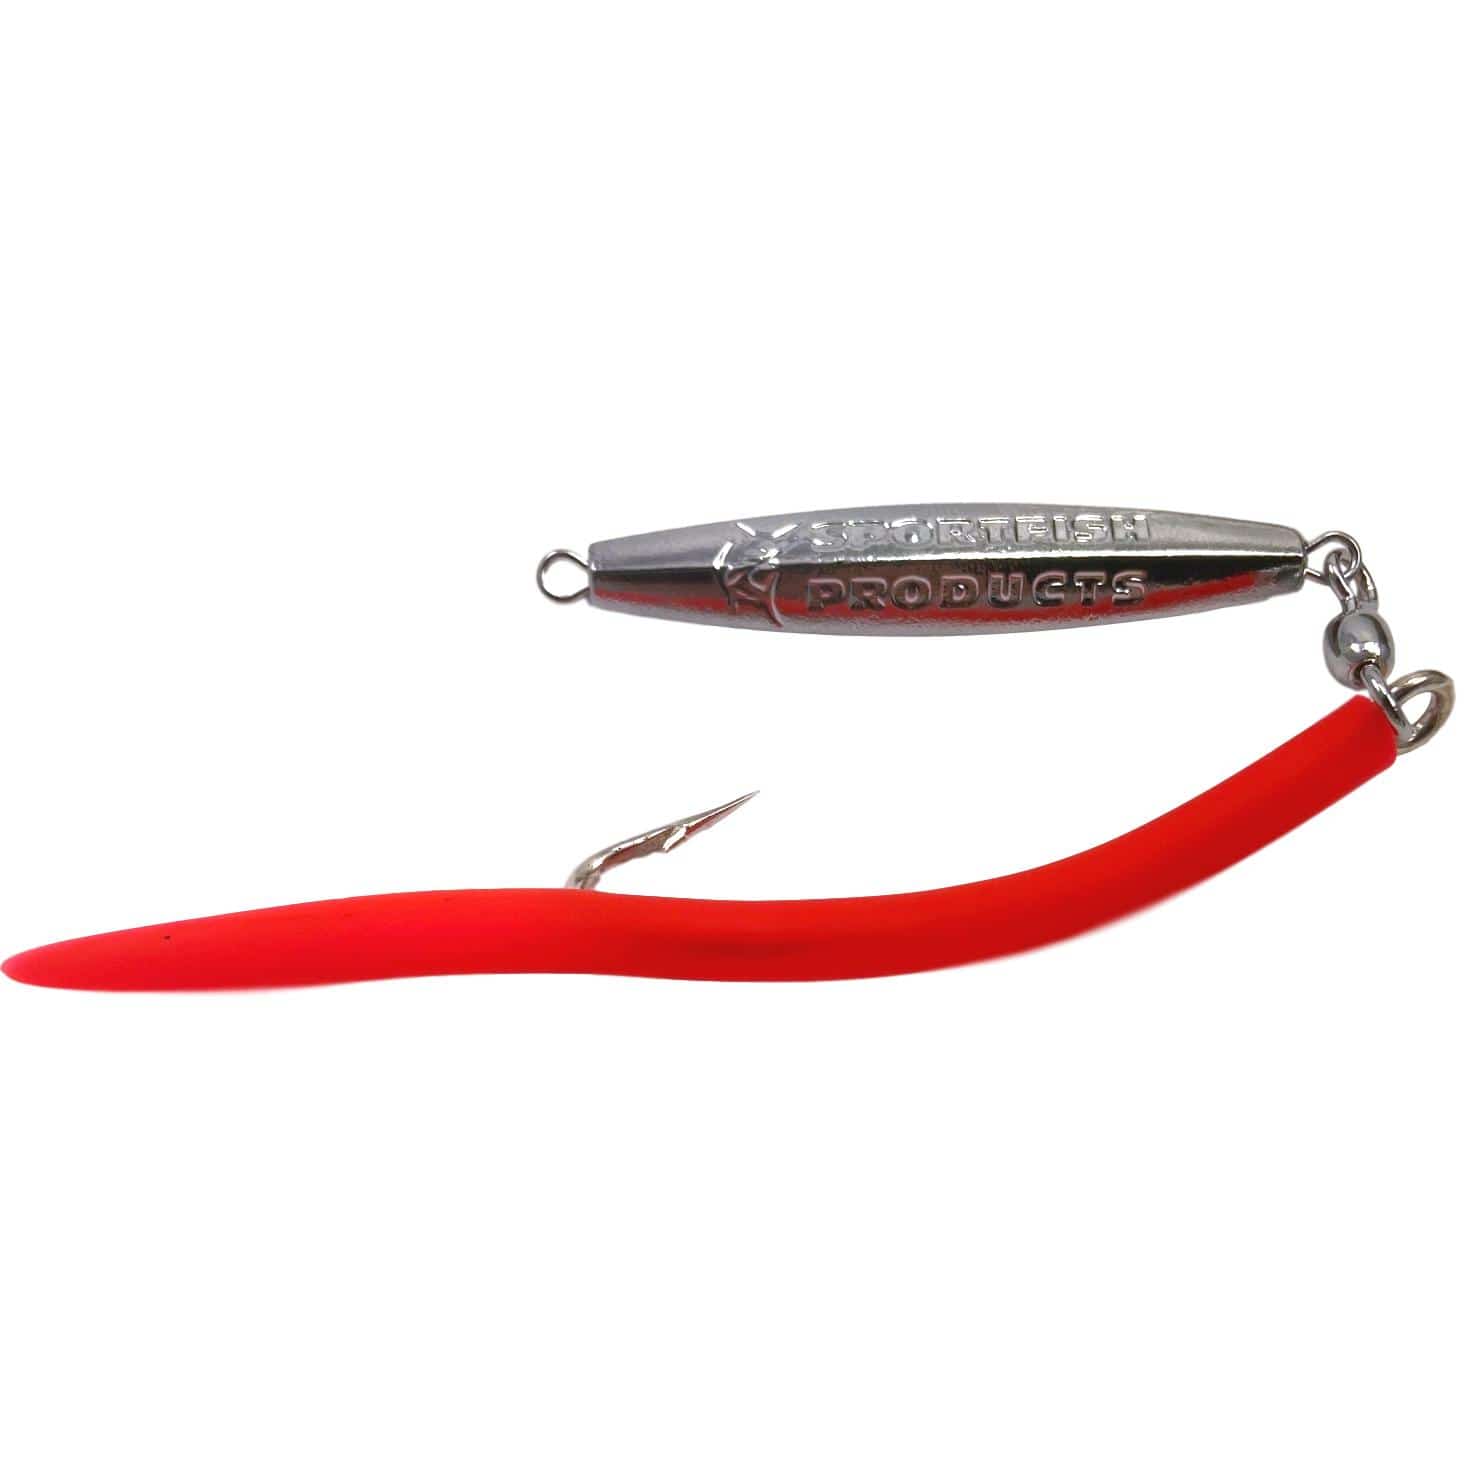 Sportfish Products Ava Jigs 1 oz - 6/0 / Bright Red Tube Tail